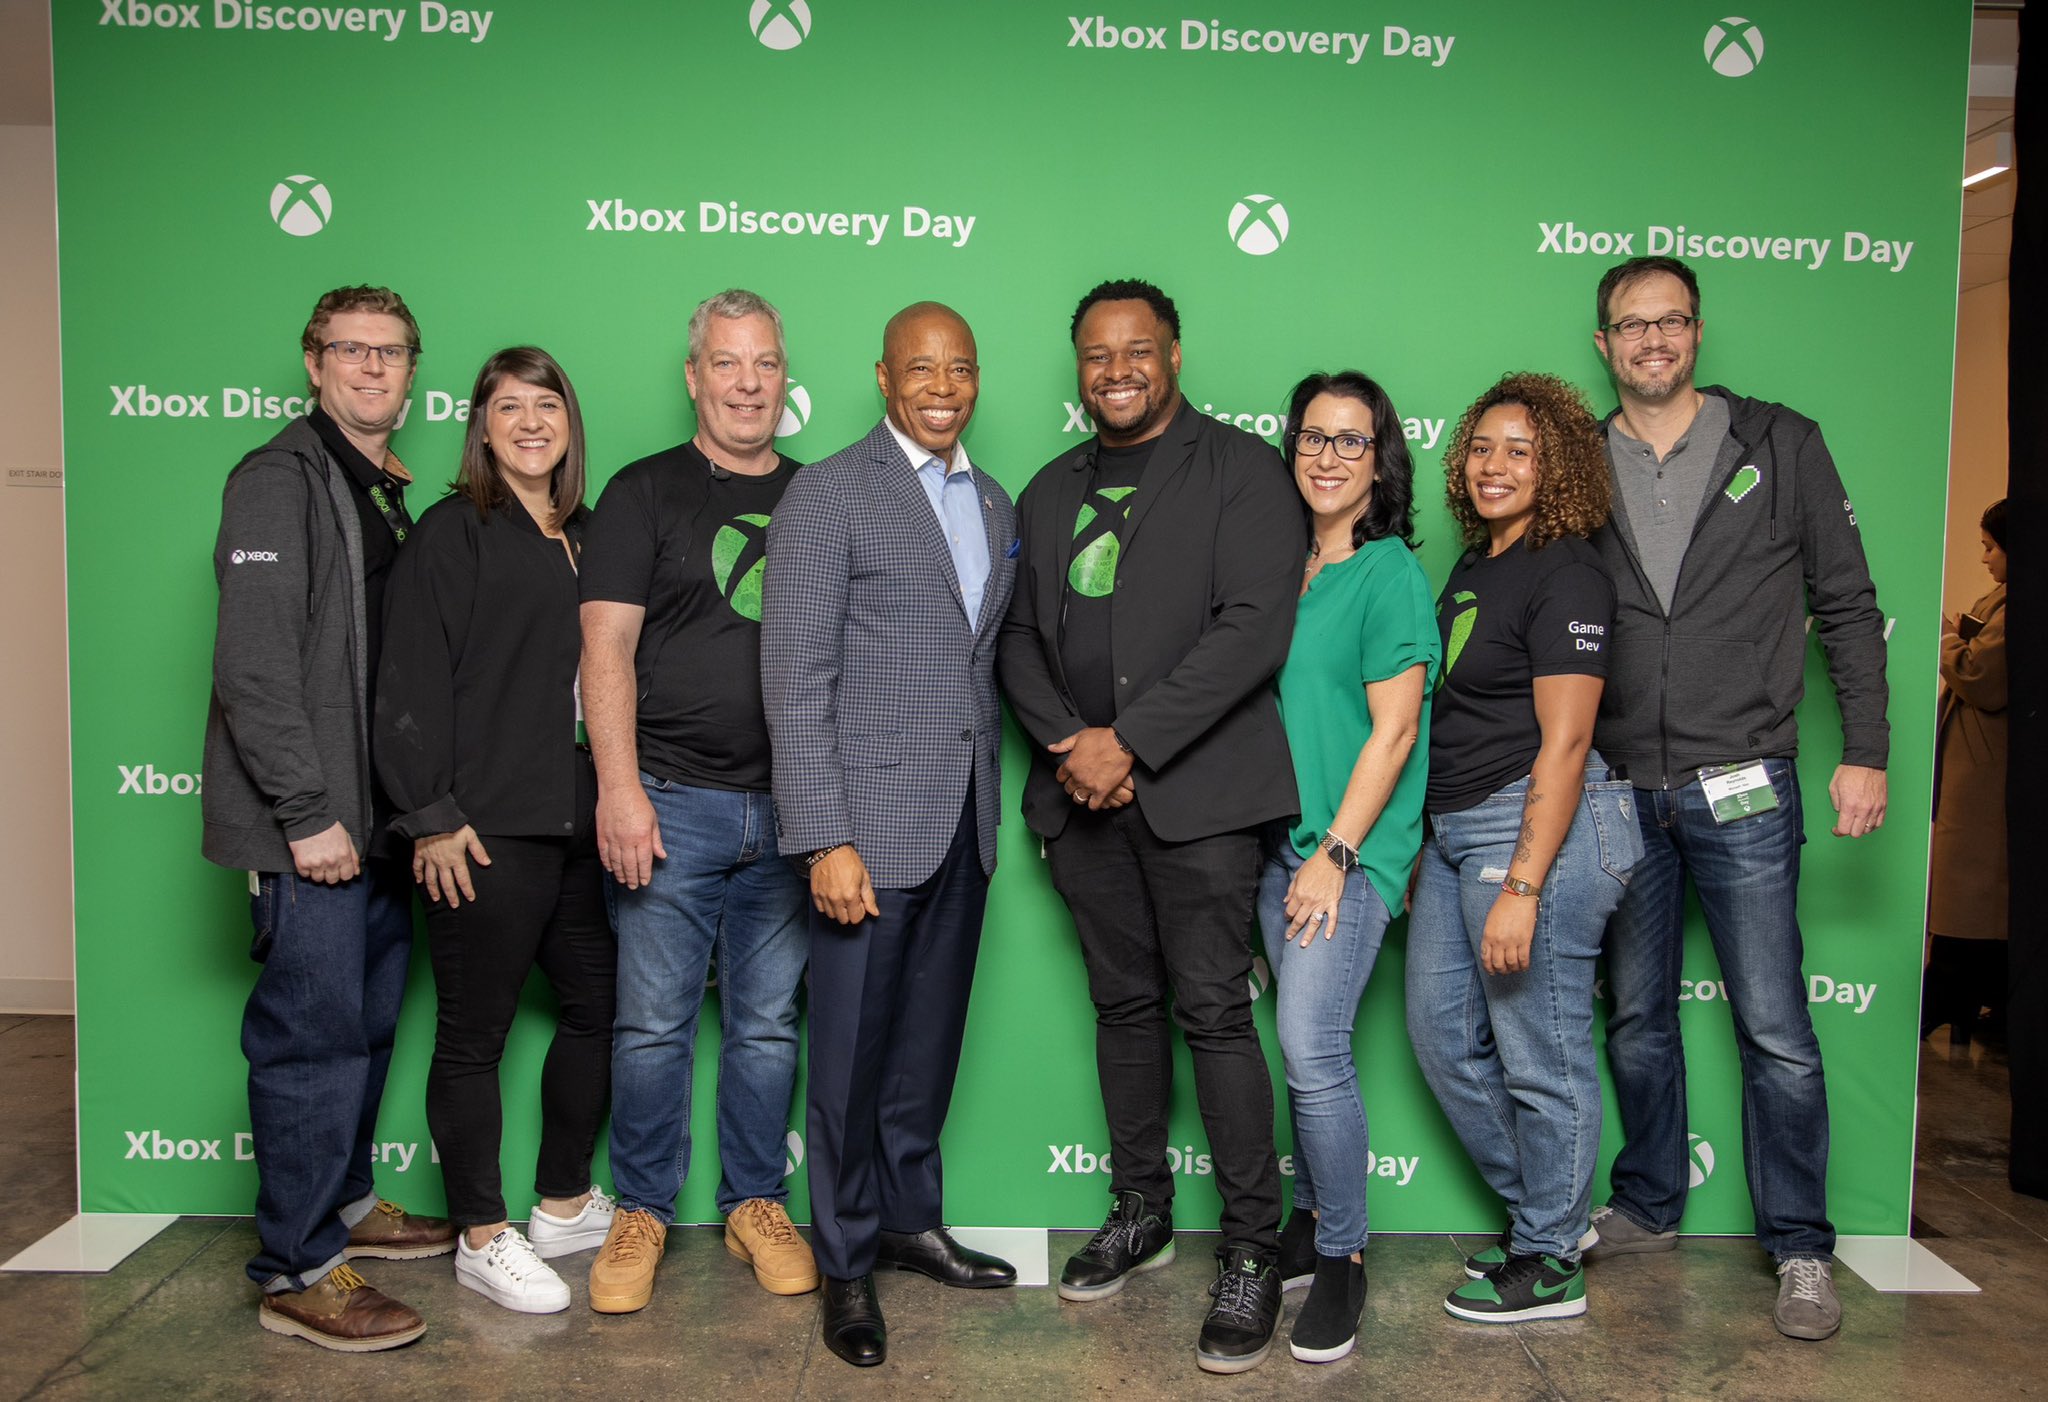 Eric Adams poses with Xbox team members.